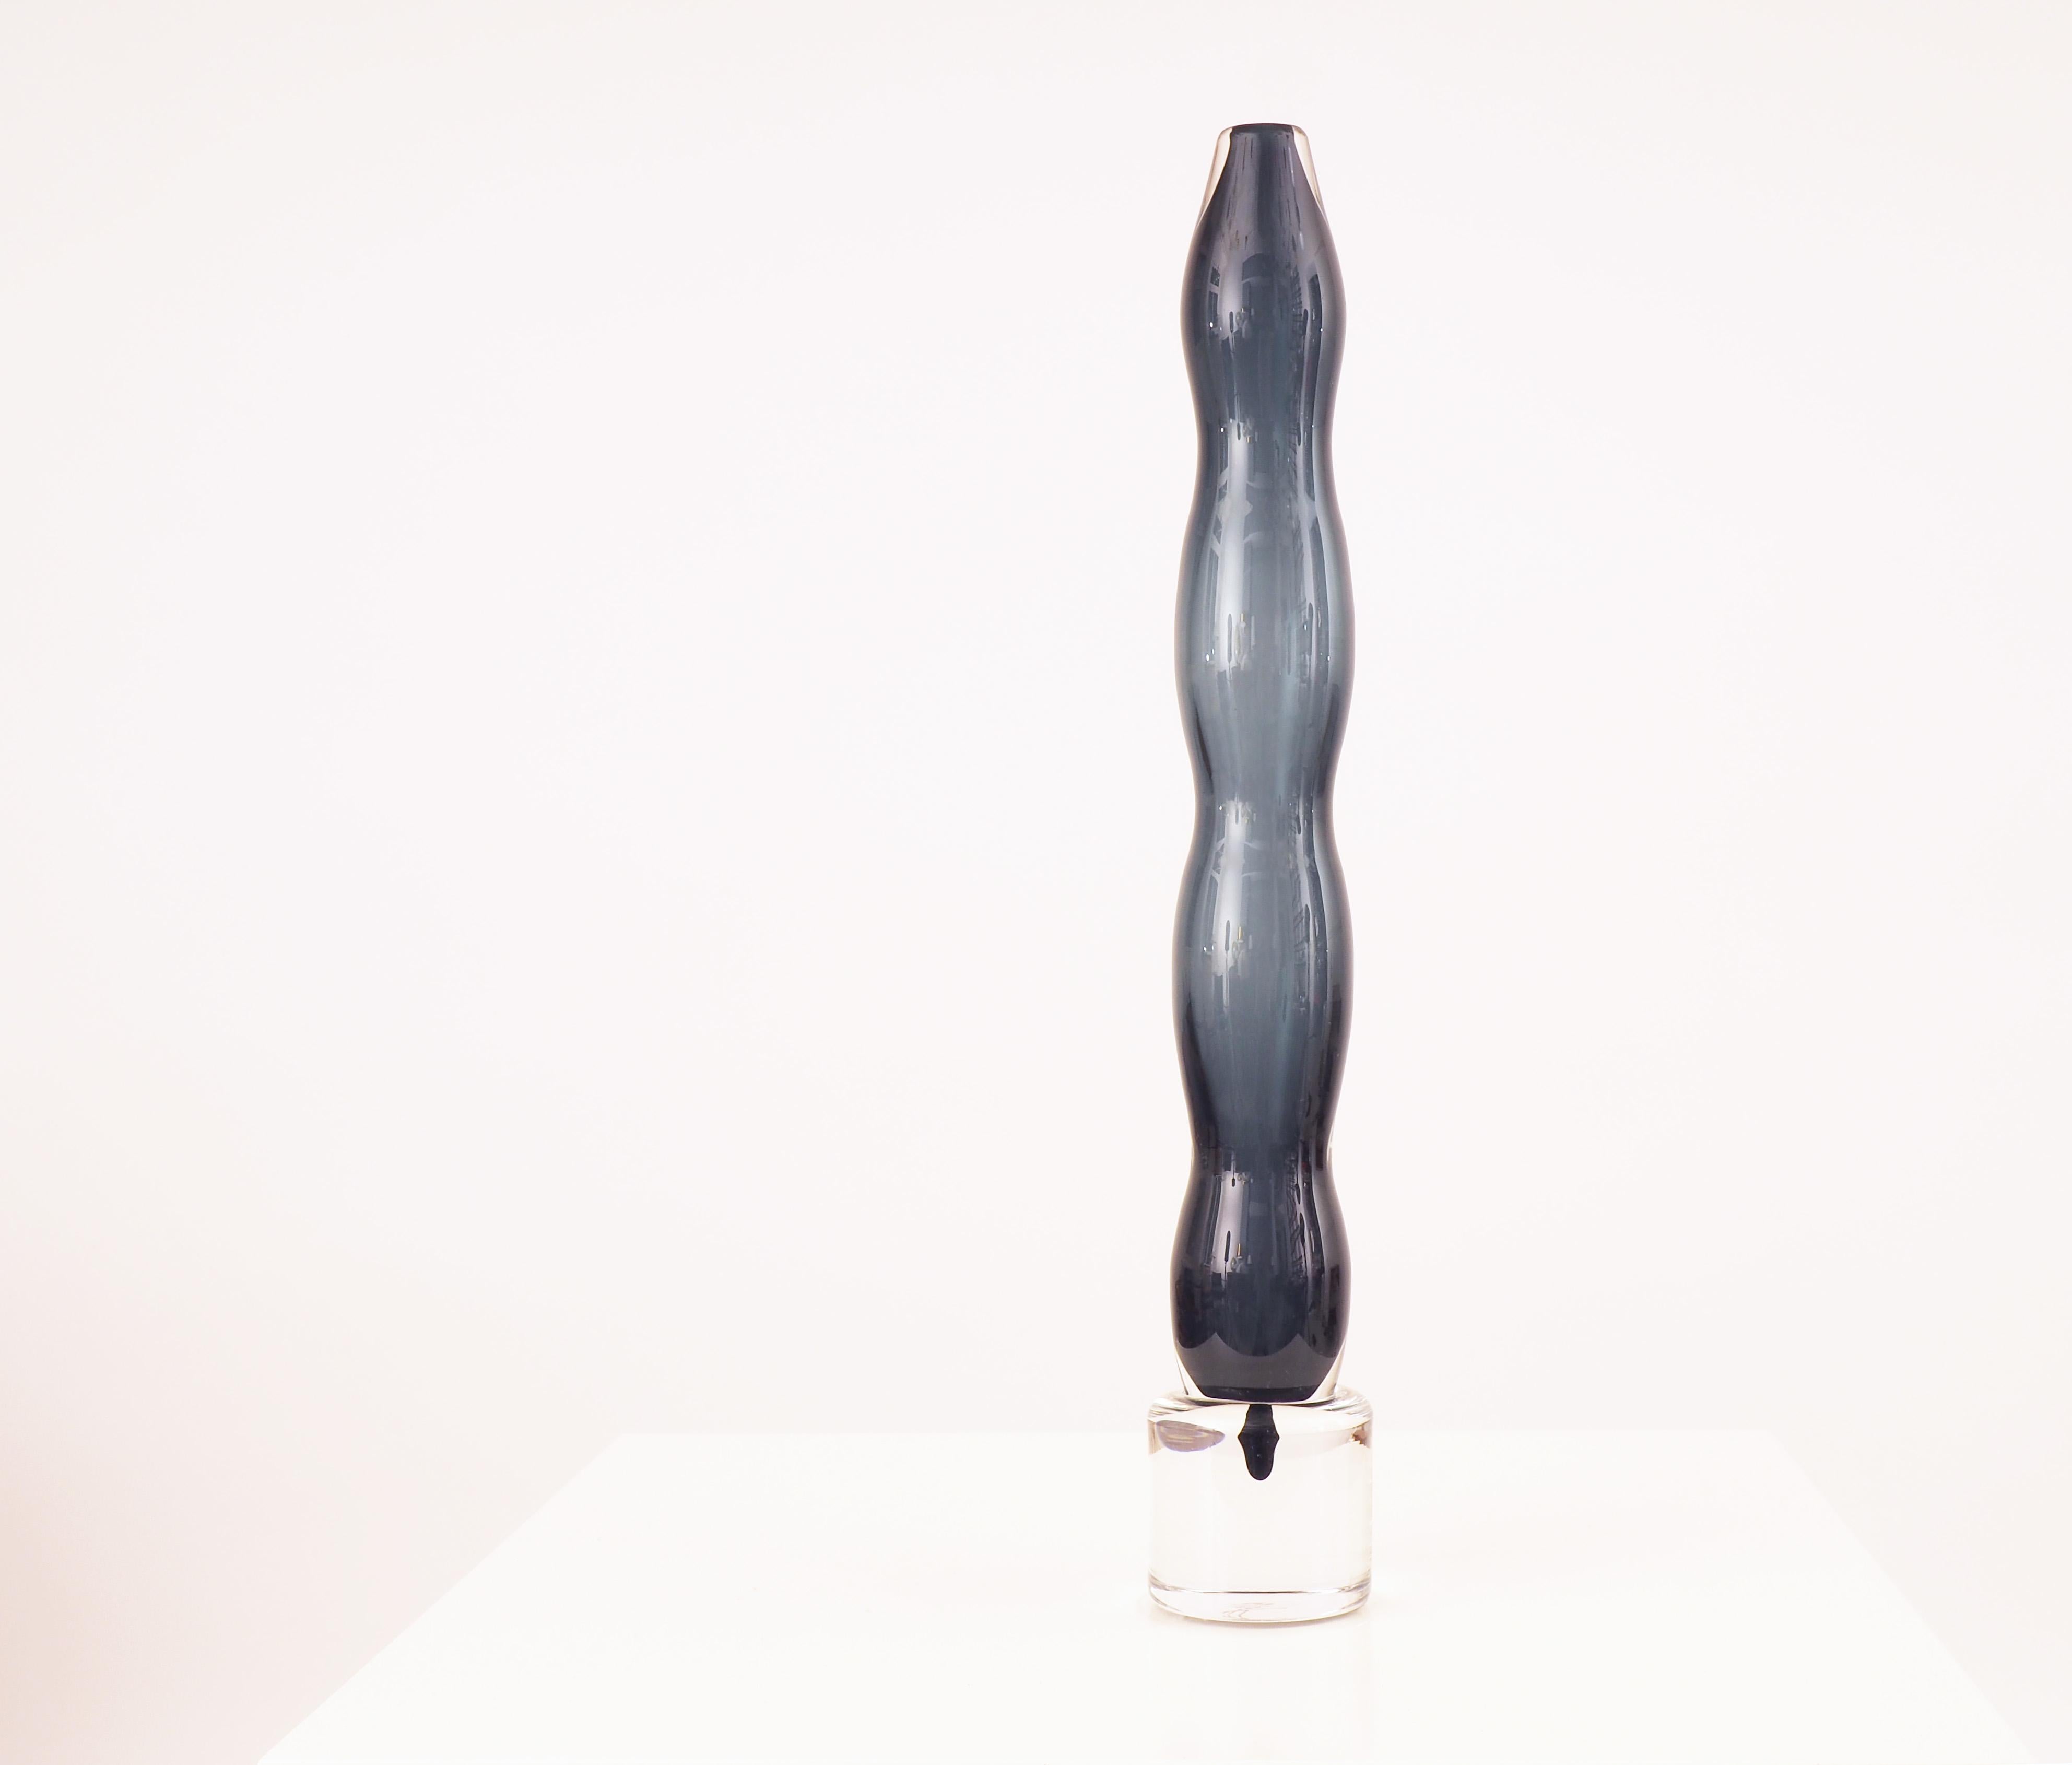 Tall glass vase or sculpture designed by Matz Borgström and blown attributed to Orrefors, 1988.

Signed 907379 Matz Borgström 24-50, Orrefors Gallery-88.